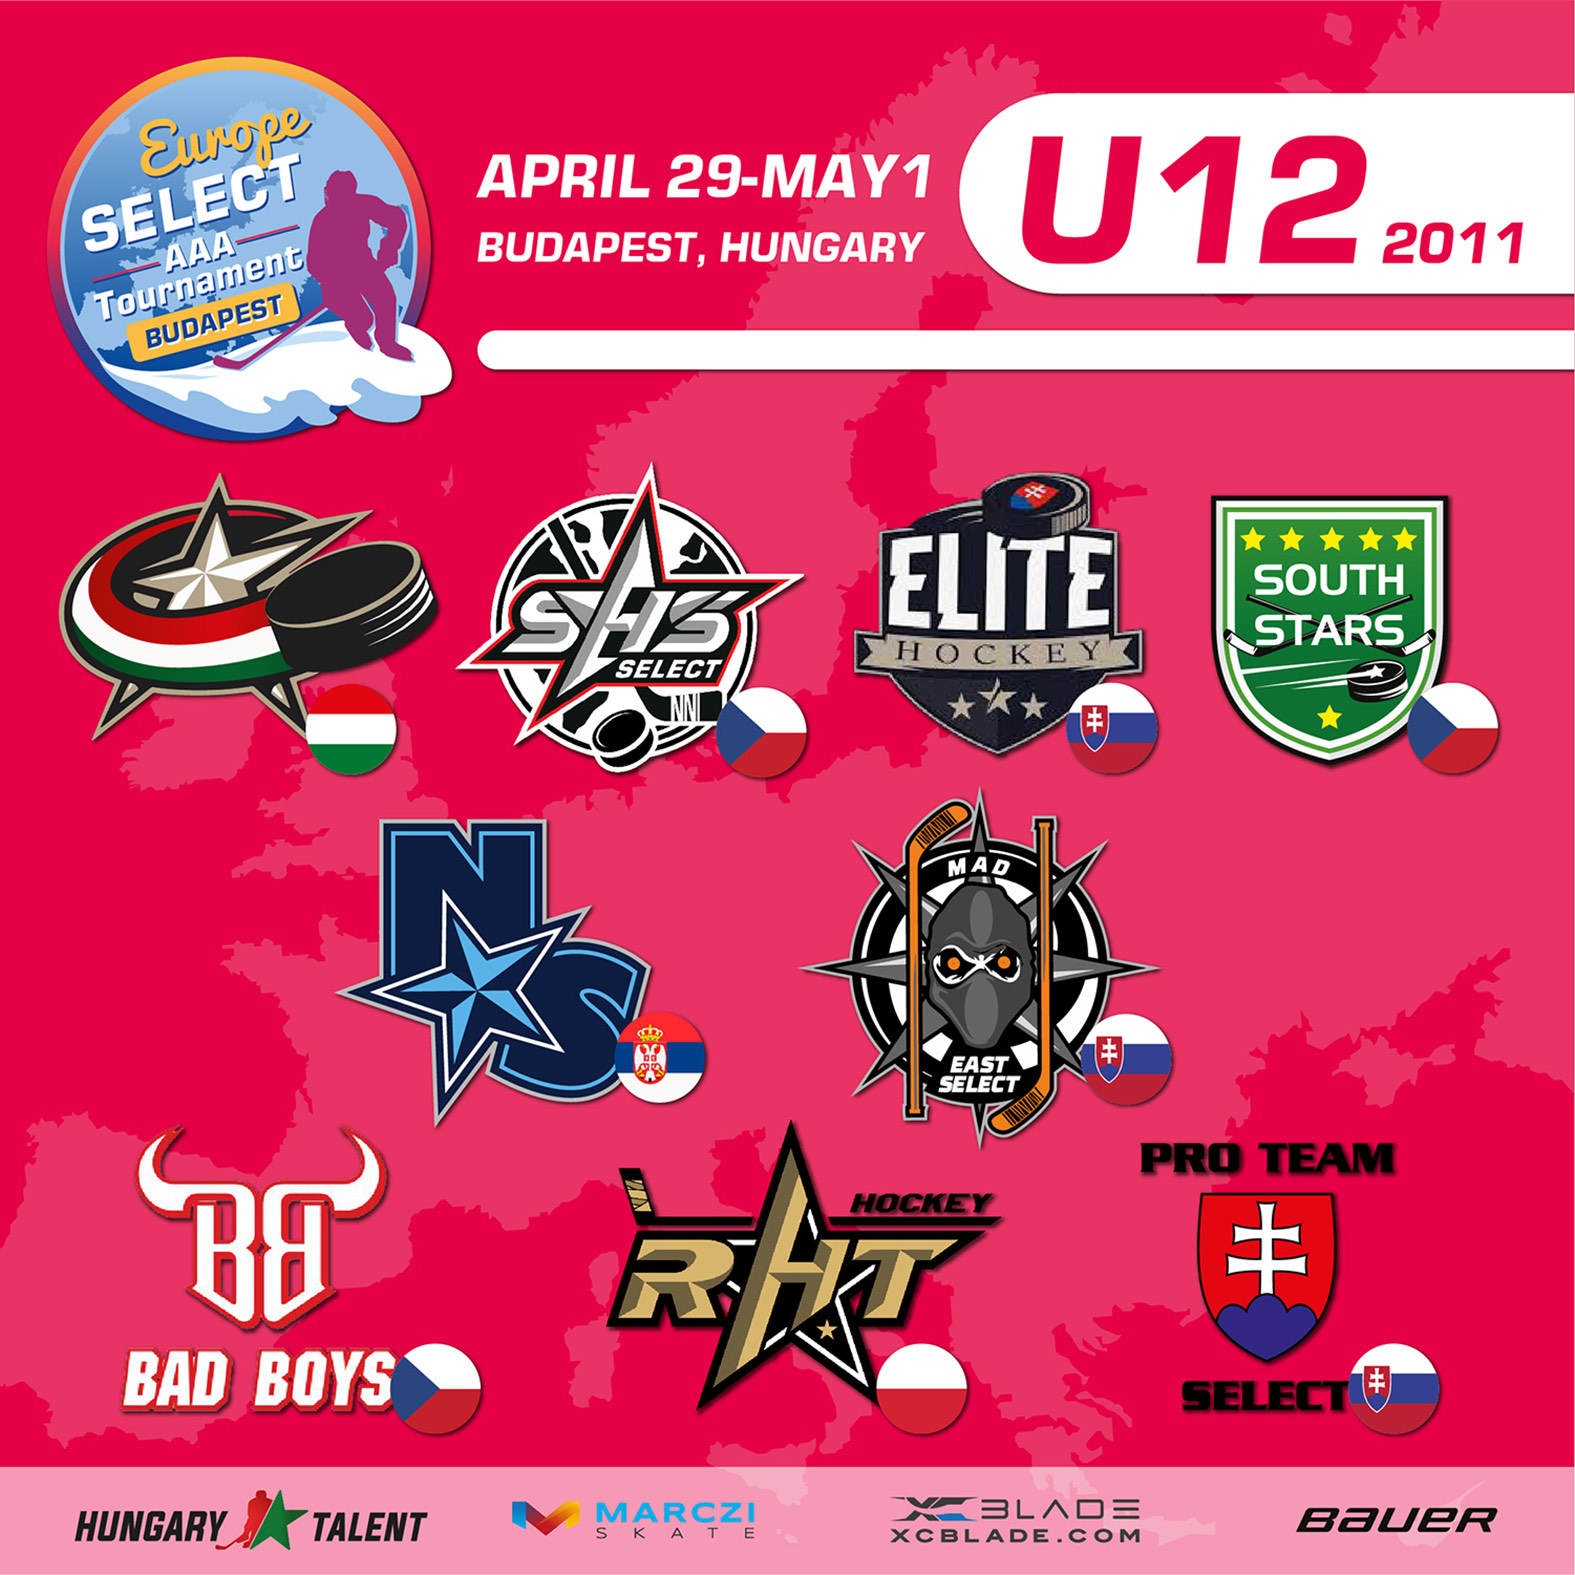 Europe Select Tournament continues with the 2011 age group